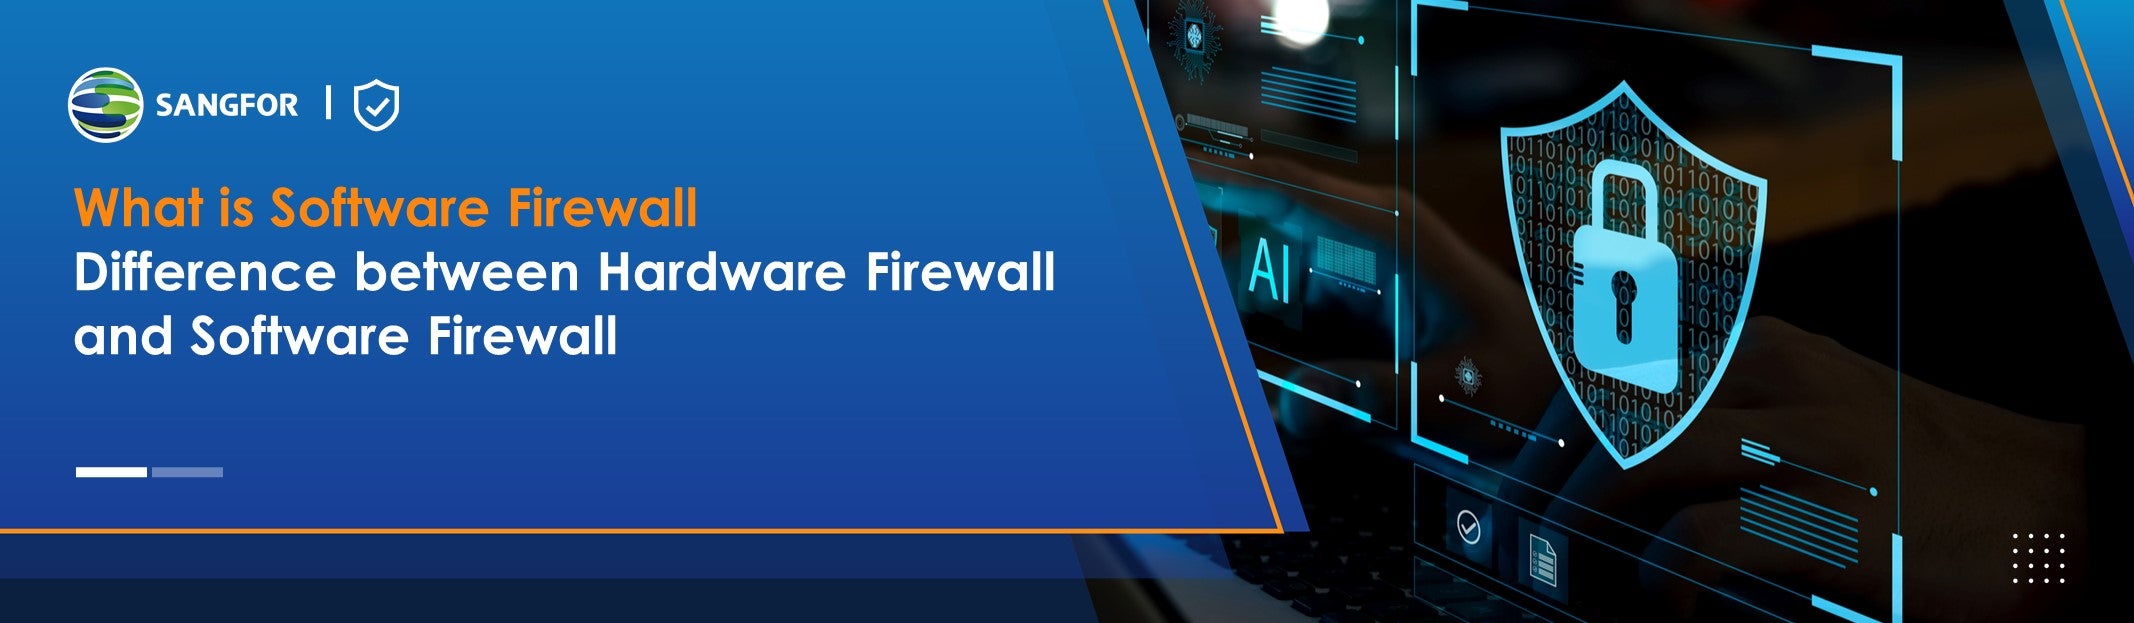 what is software firewall difference between software firewall and hardware firewall